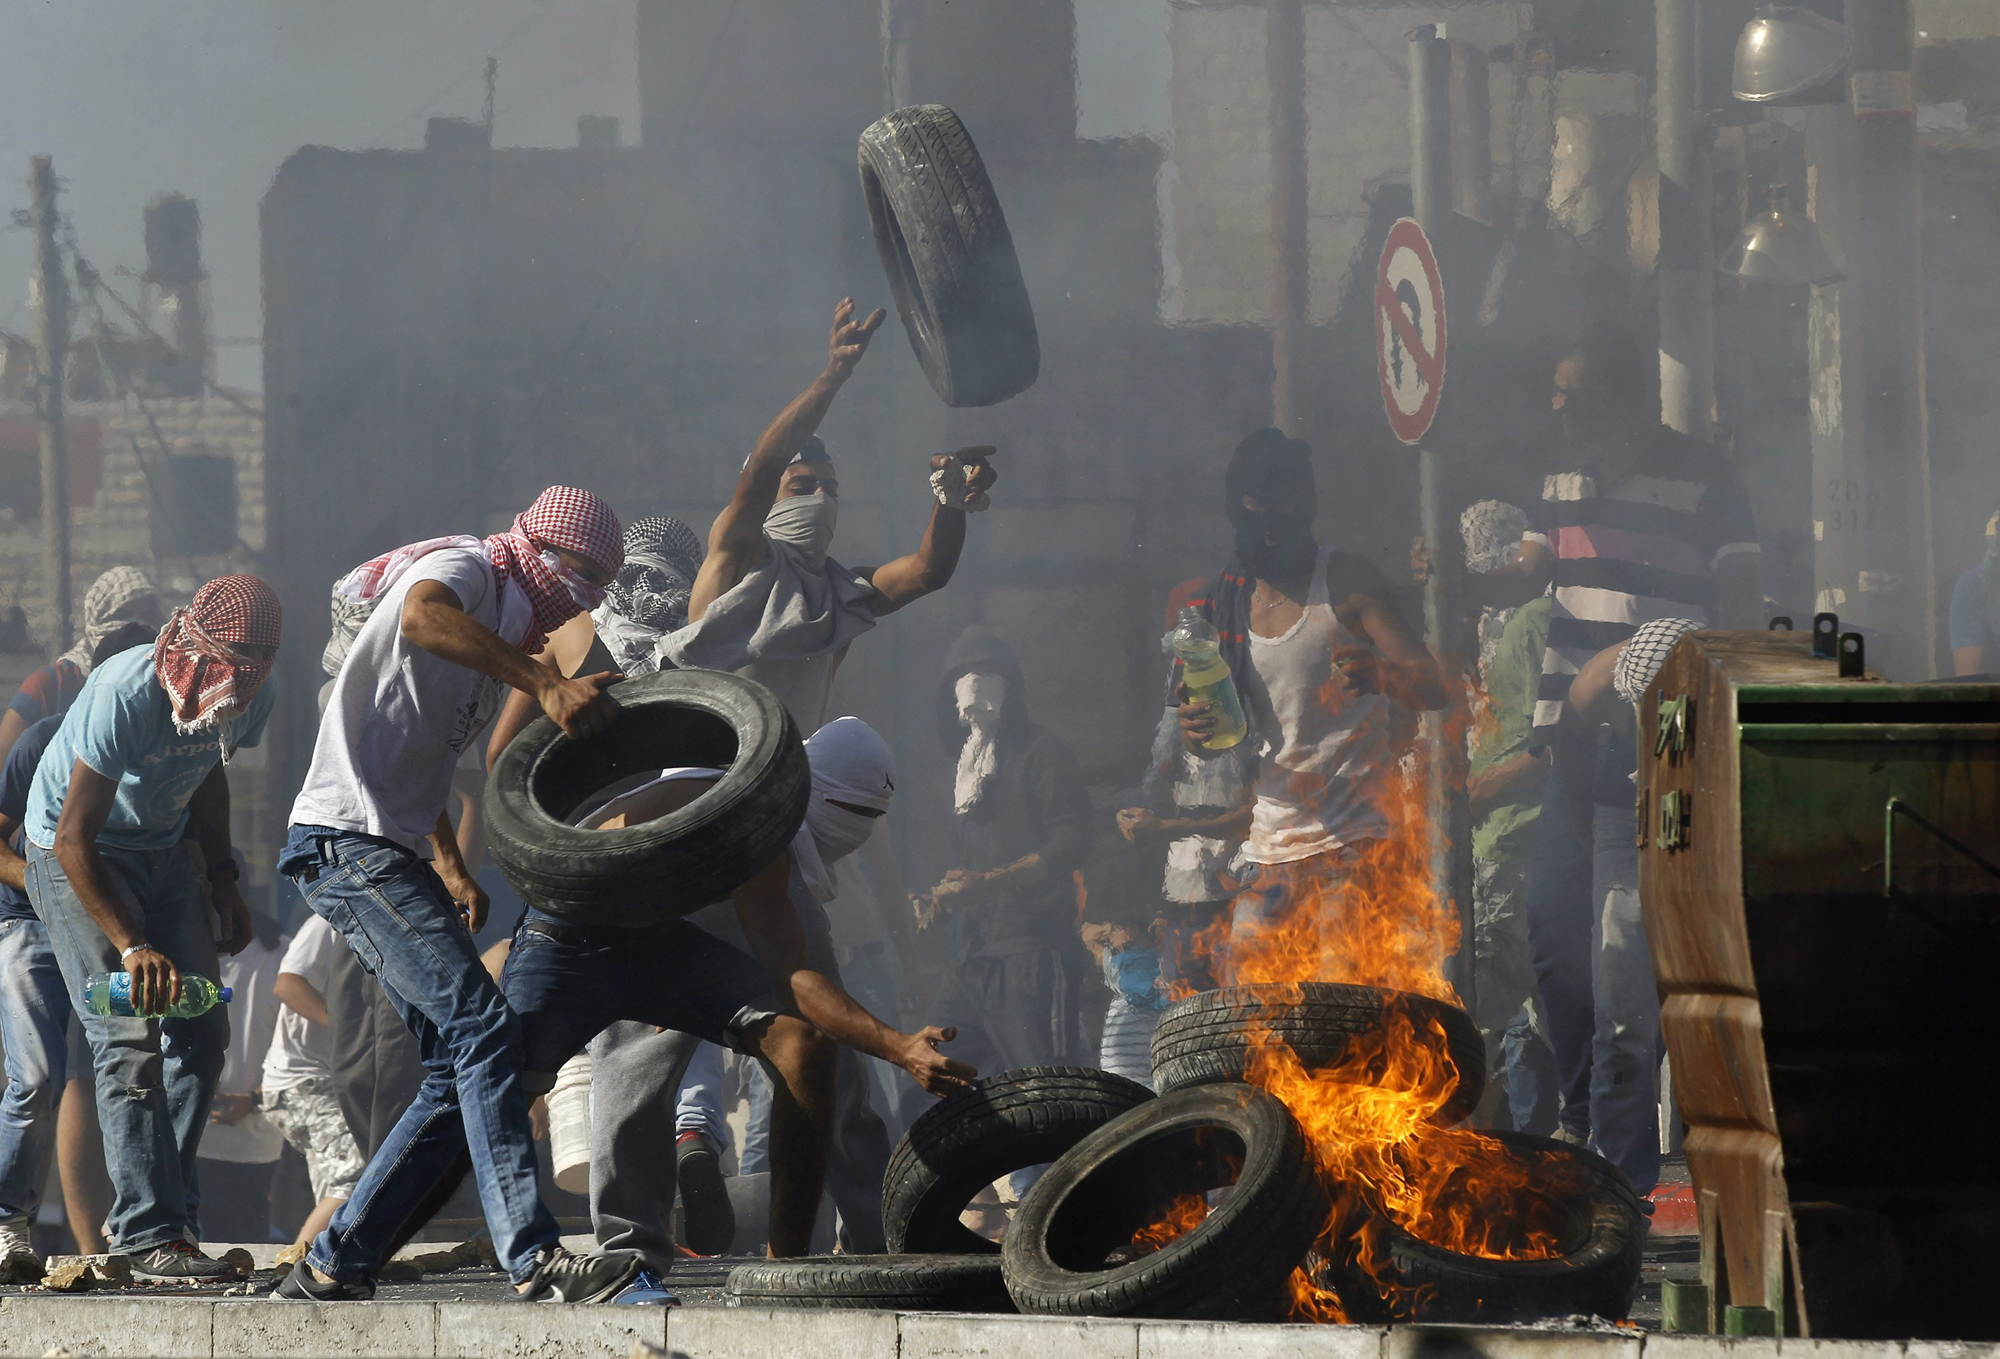 Palestinians set tyres ablaze during clashes with Israeli police in Shuafat, an Arab suburb of Jerusalem July 2.